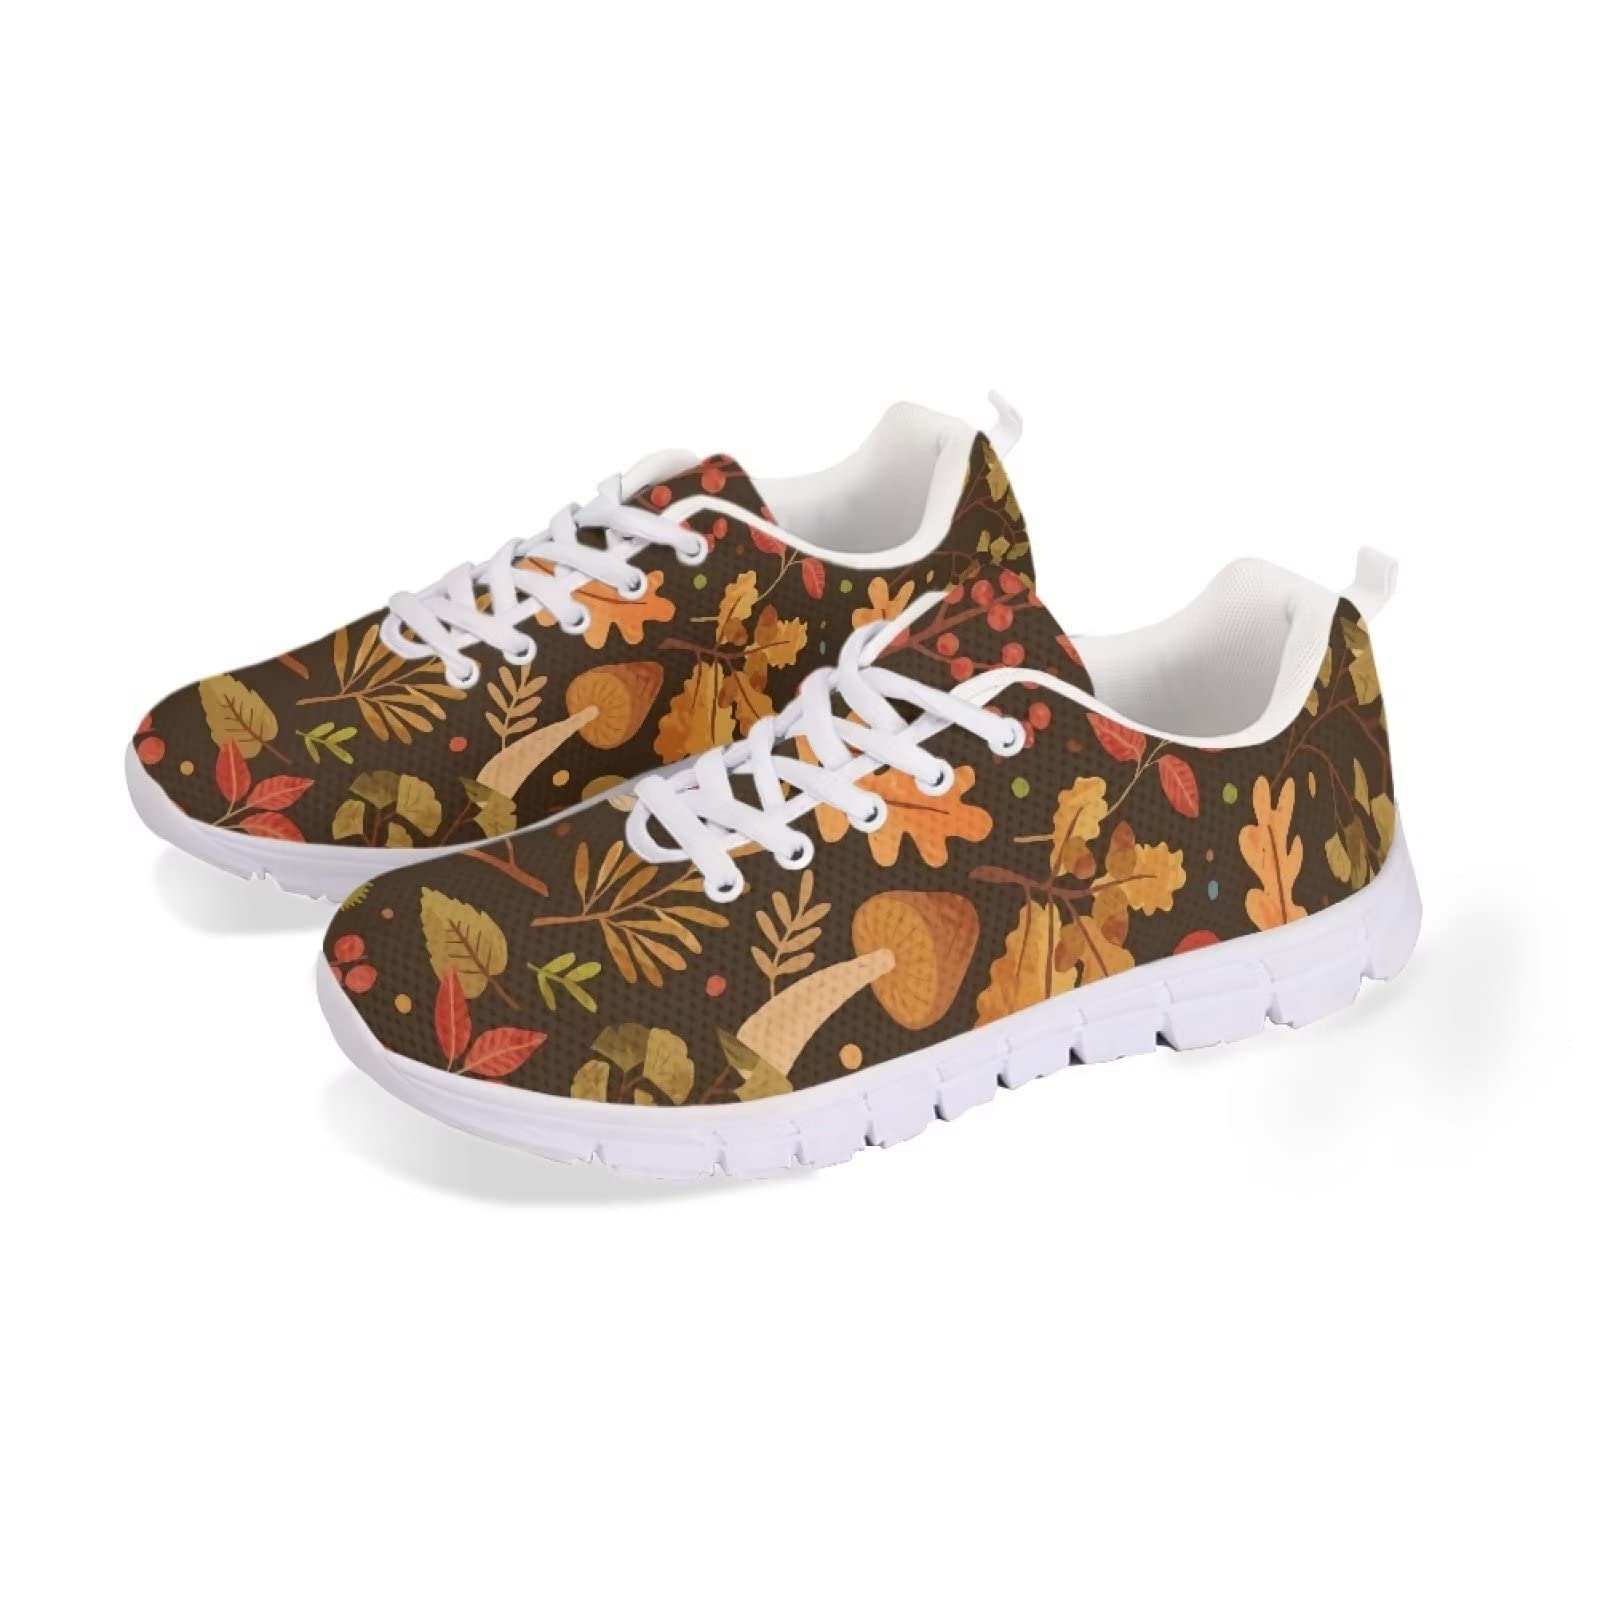 INSTANTARTS Wild Mushroom Womens Running Shoes Fall Maple Leaves Breathable Mesh Tennis Sneakers Non-Slip Fashion Athletic Jogging Yoga Shoes